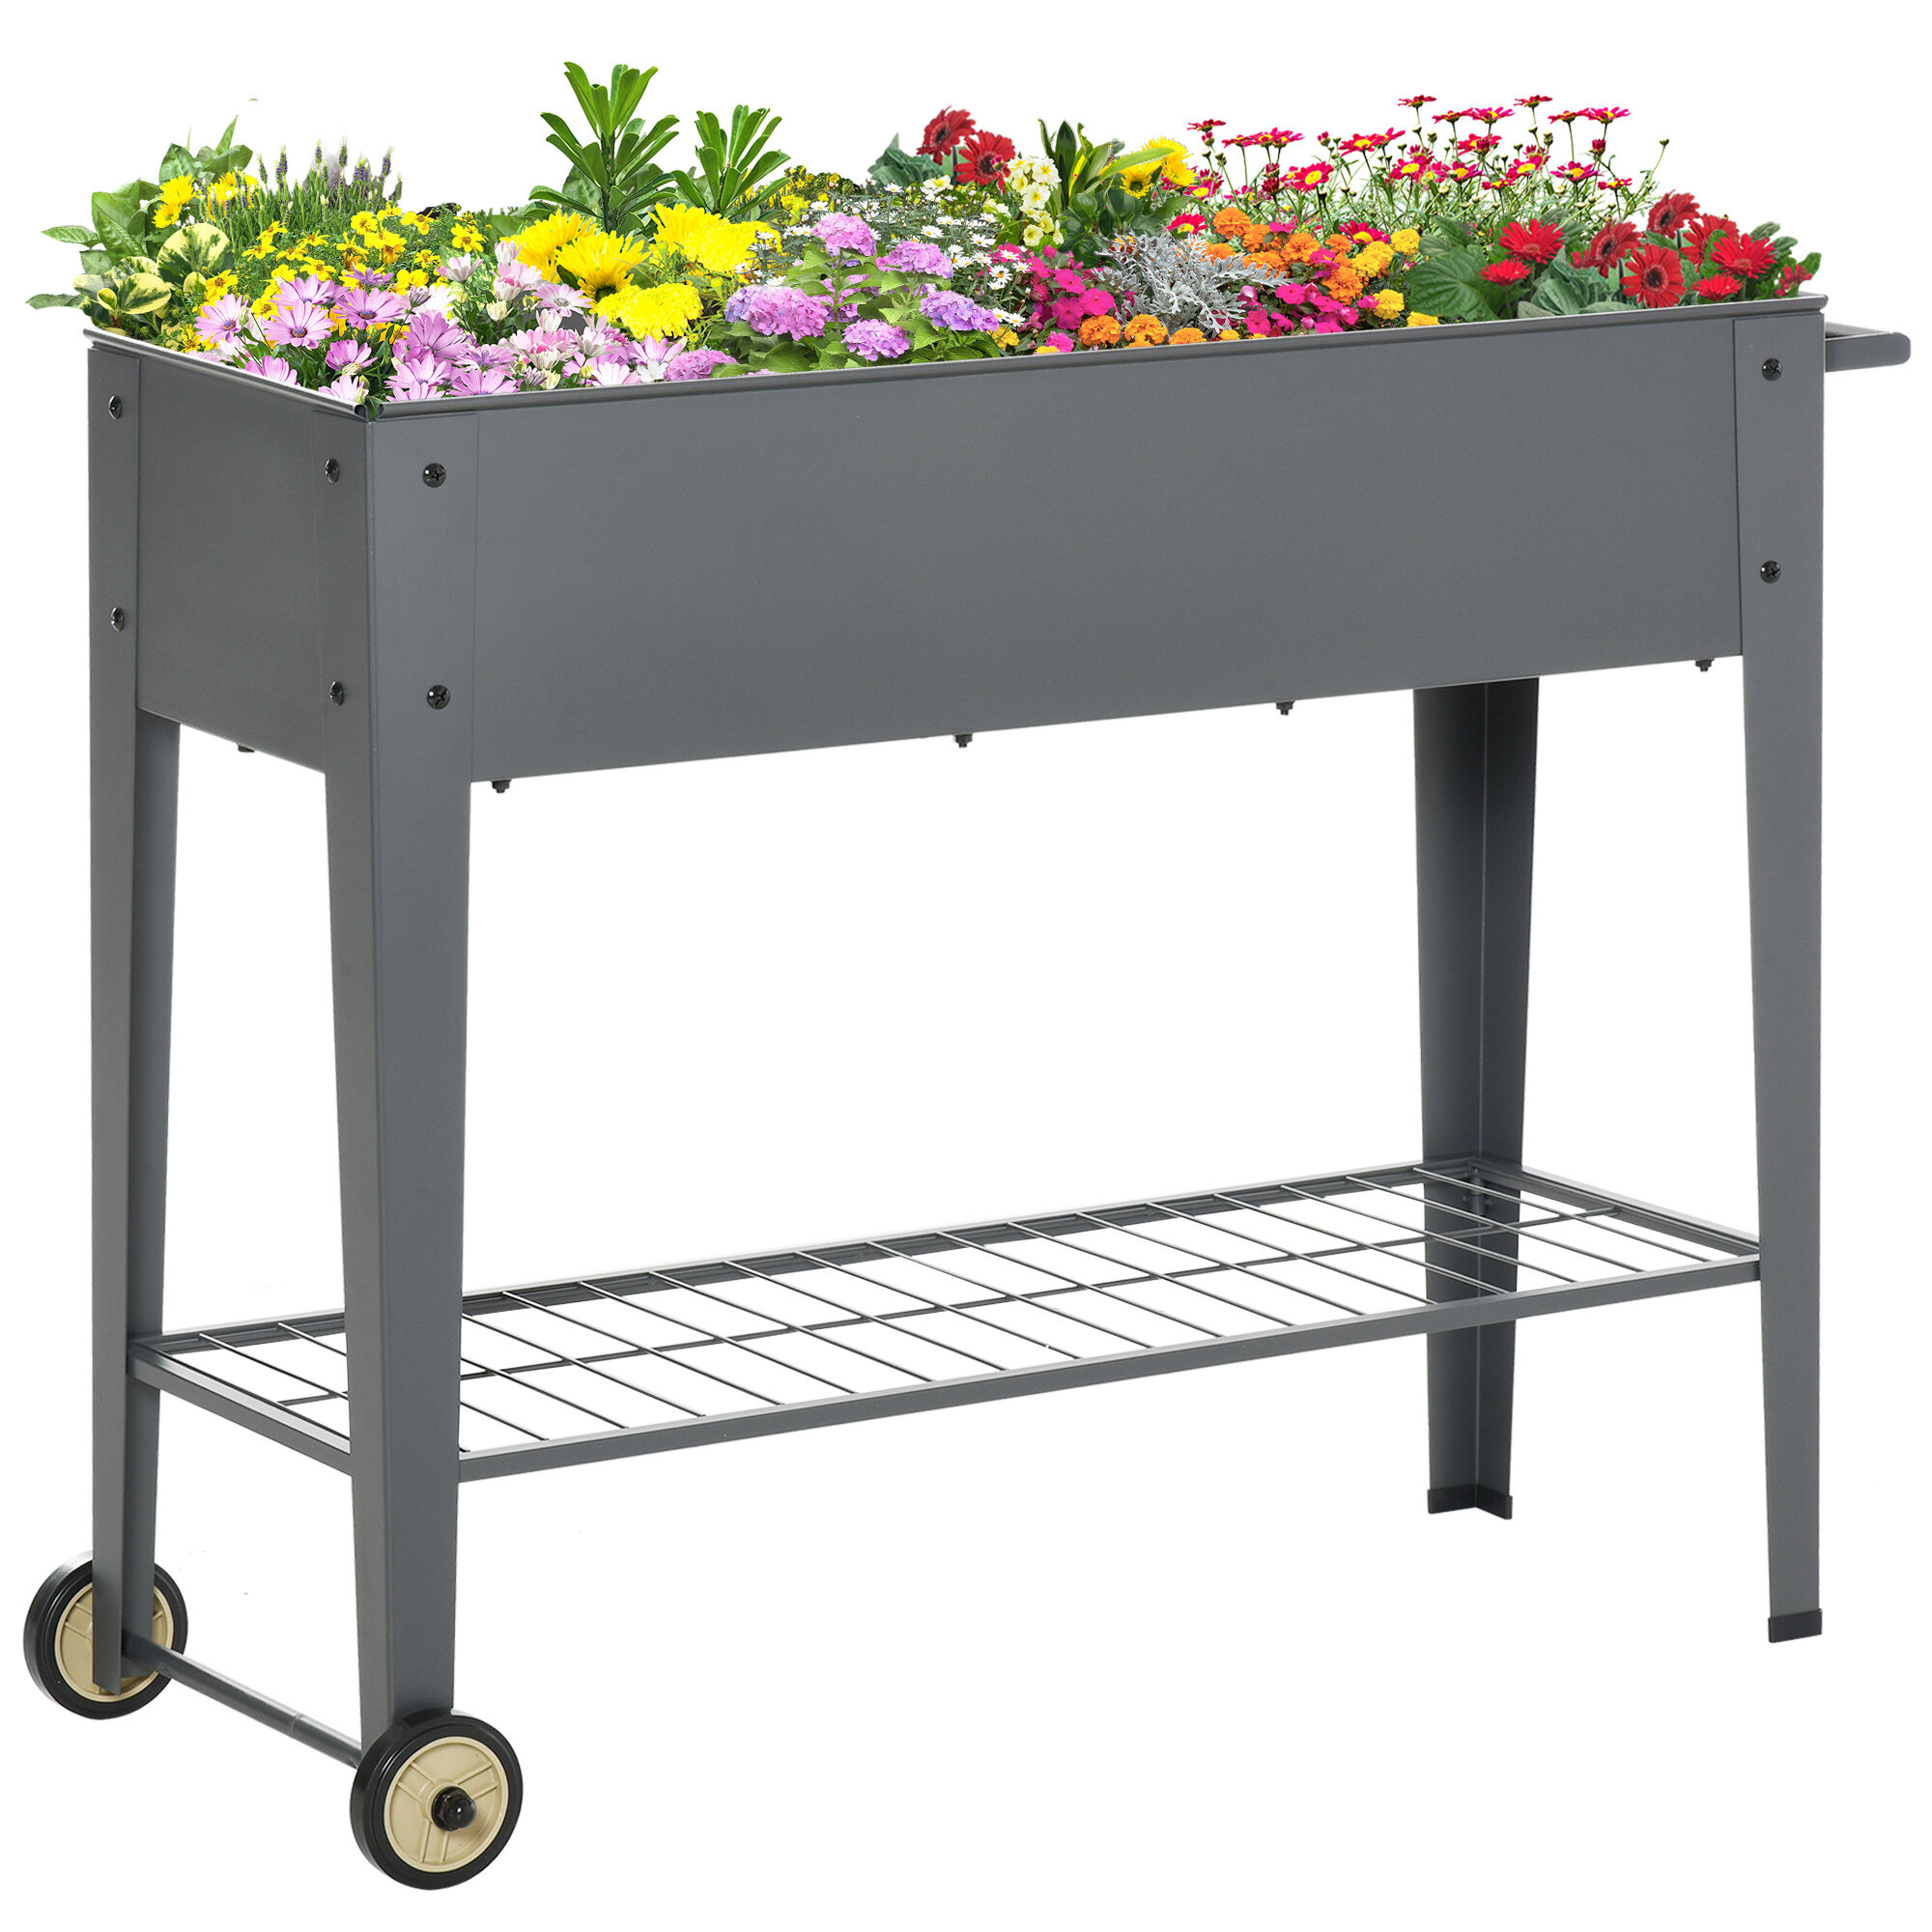 Outsunny 41" x 15" x 32" Elevated Outdoor Raised Garden Beds, Metal Planter Box with 2 Wheels, Bottom Shelf for Storing Tools & Water Drainage, Gray